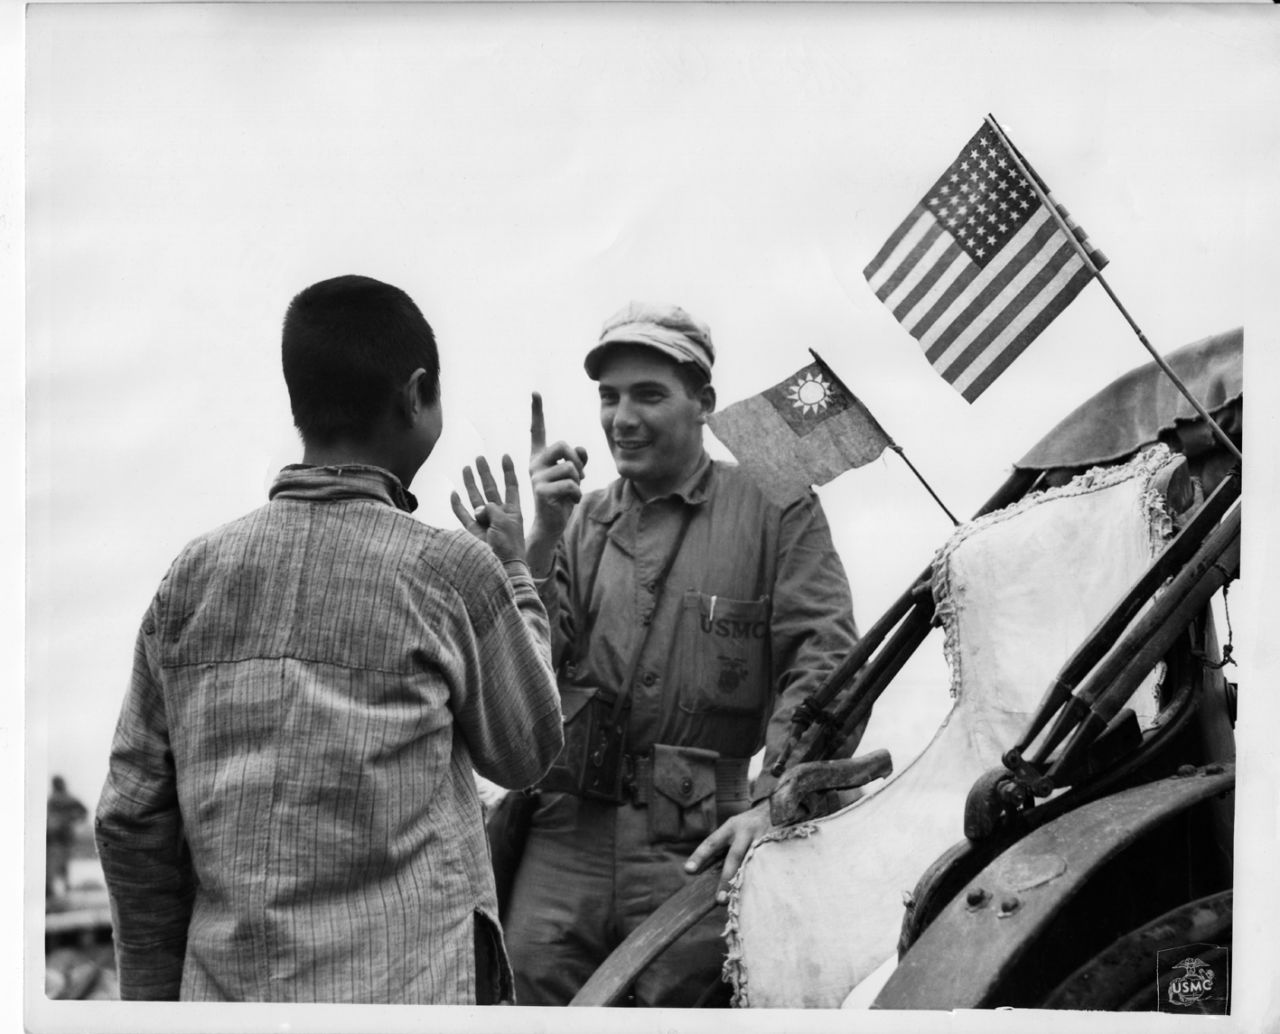 Marine Corporal Richard W. Miller bargains with a Chinese man for a lift in his rickshaw on September 30, 1945. This image was among 23,000 discovered by Chinese historian Zhang Dongpan in 2006 in the U.S. National Archives and Records Office. 